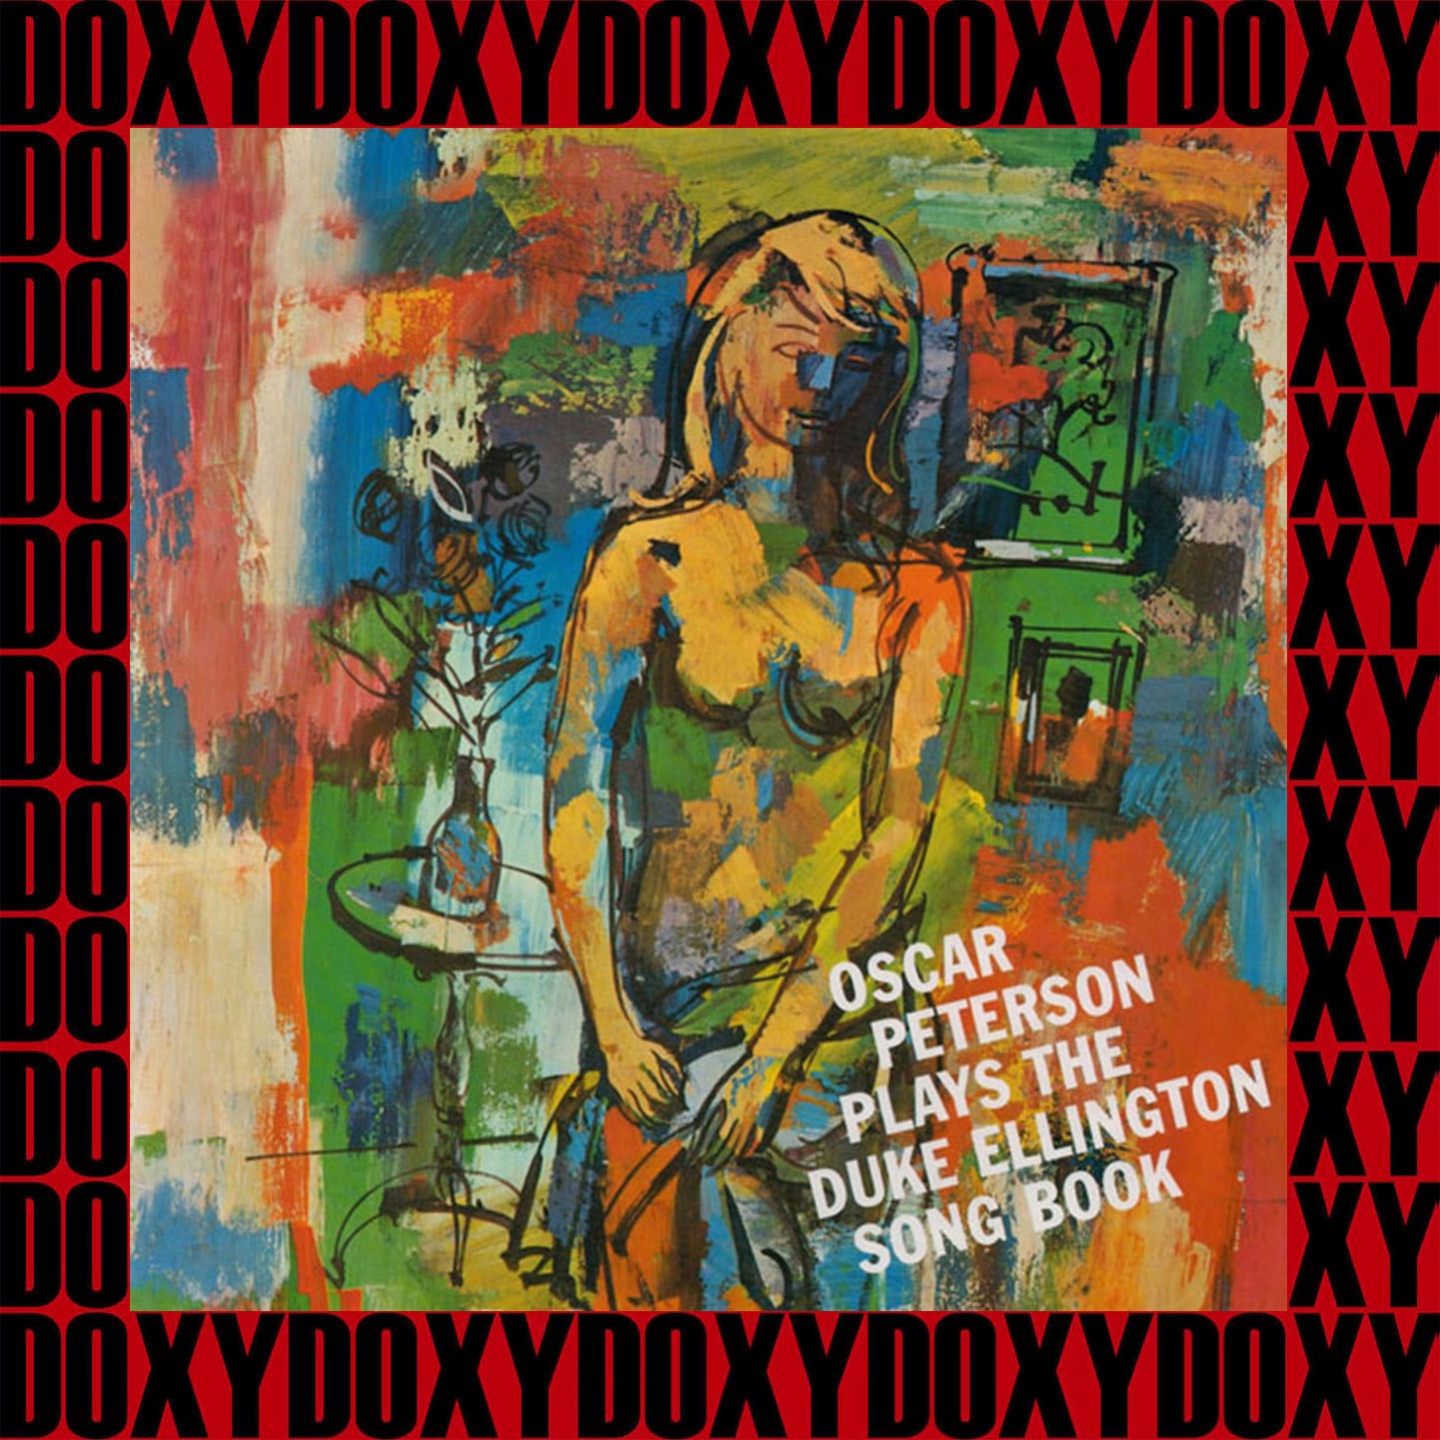 Plays The Duke Ellington Song Book (Remastered Version) (Doxy Collection)